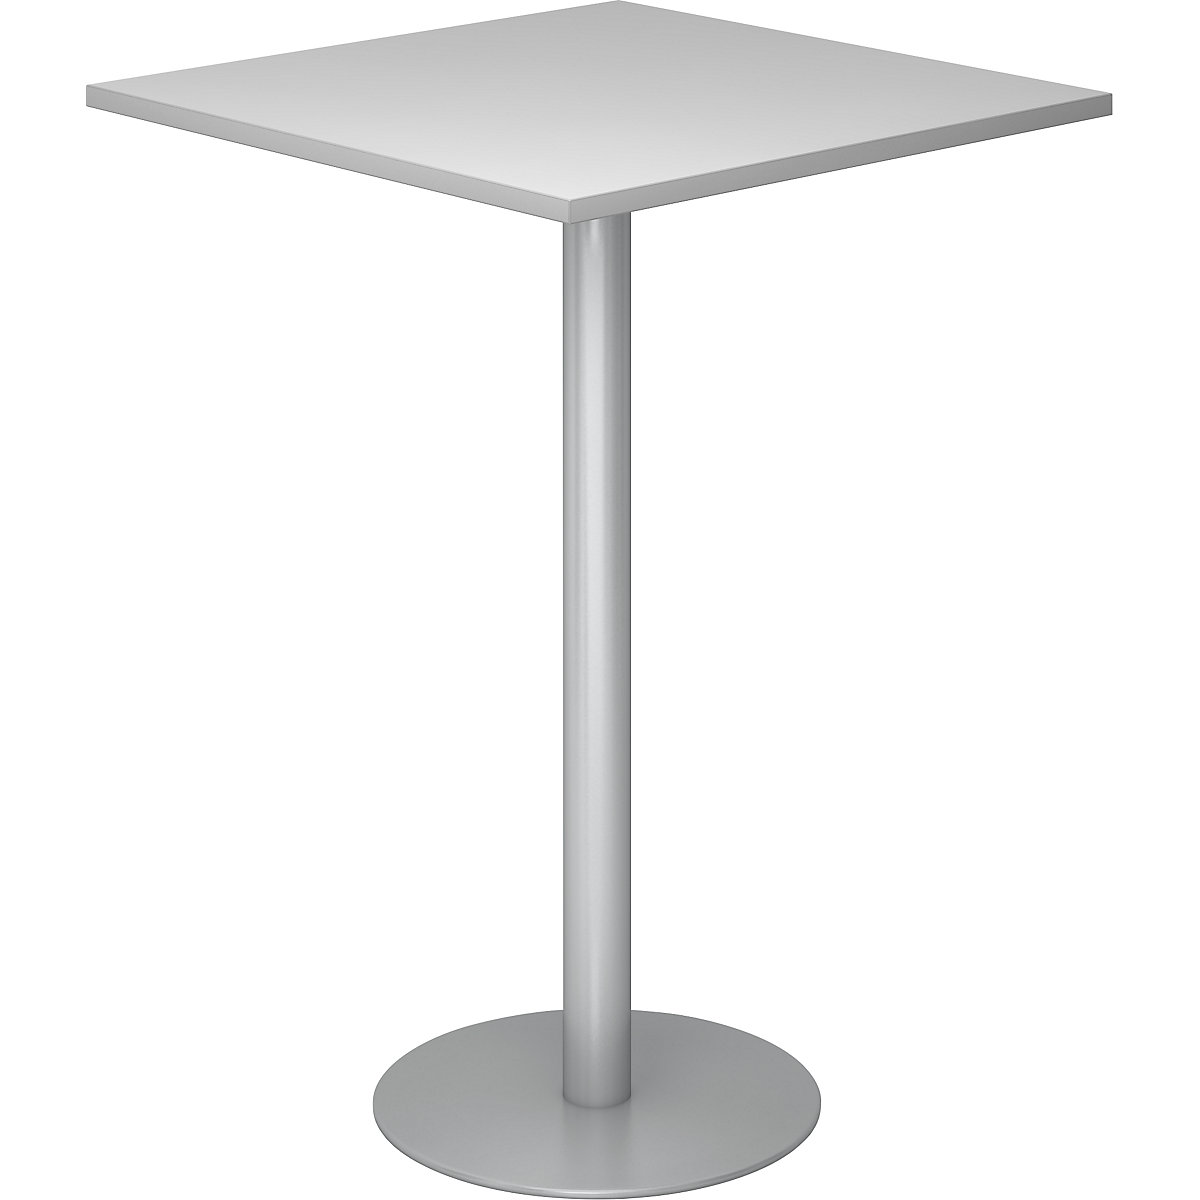 Pedestal table, LxW 800 x 800 mm, 1116 mm high, silver frame, tabletop in light grey-3